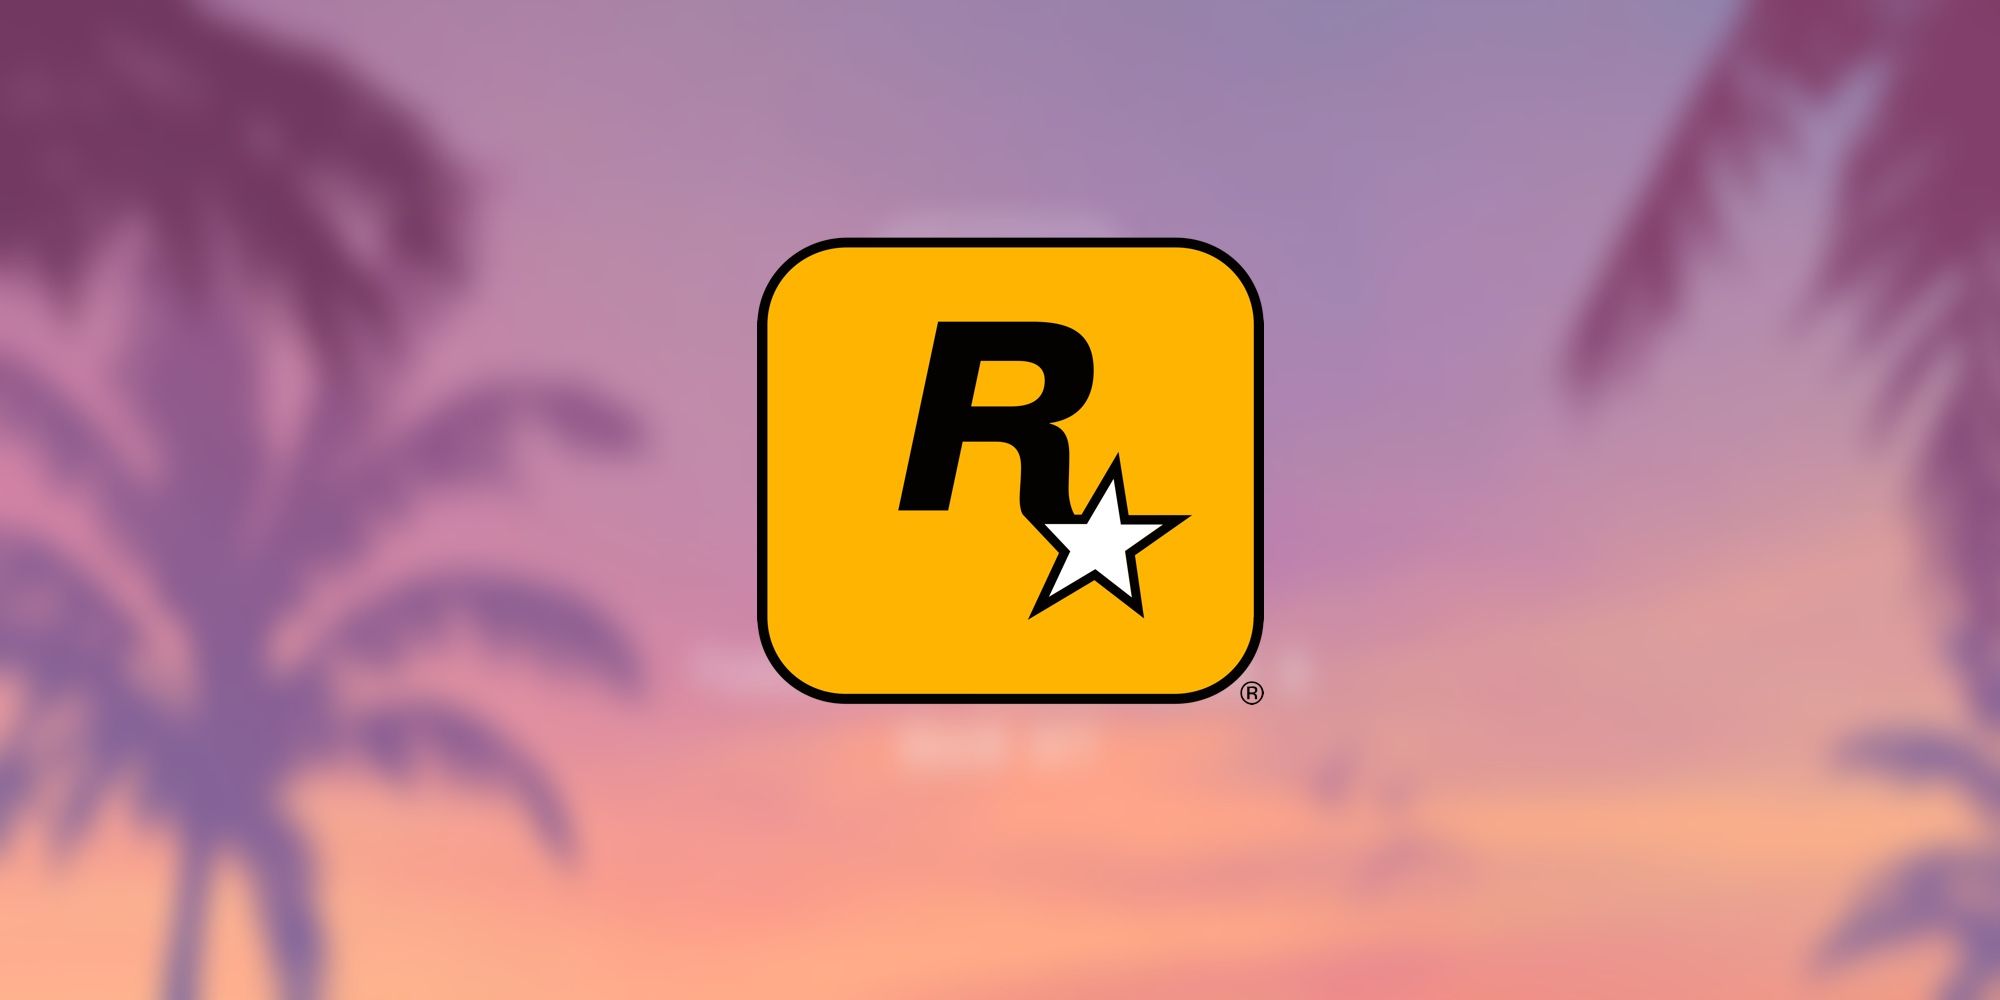 GTA 6 Trailer Release Date: 'GTA 6' trailer release date confirmed by  publisher Rockstar Games - The Economic Times